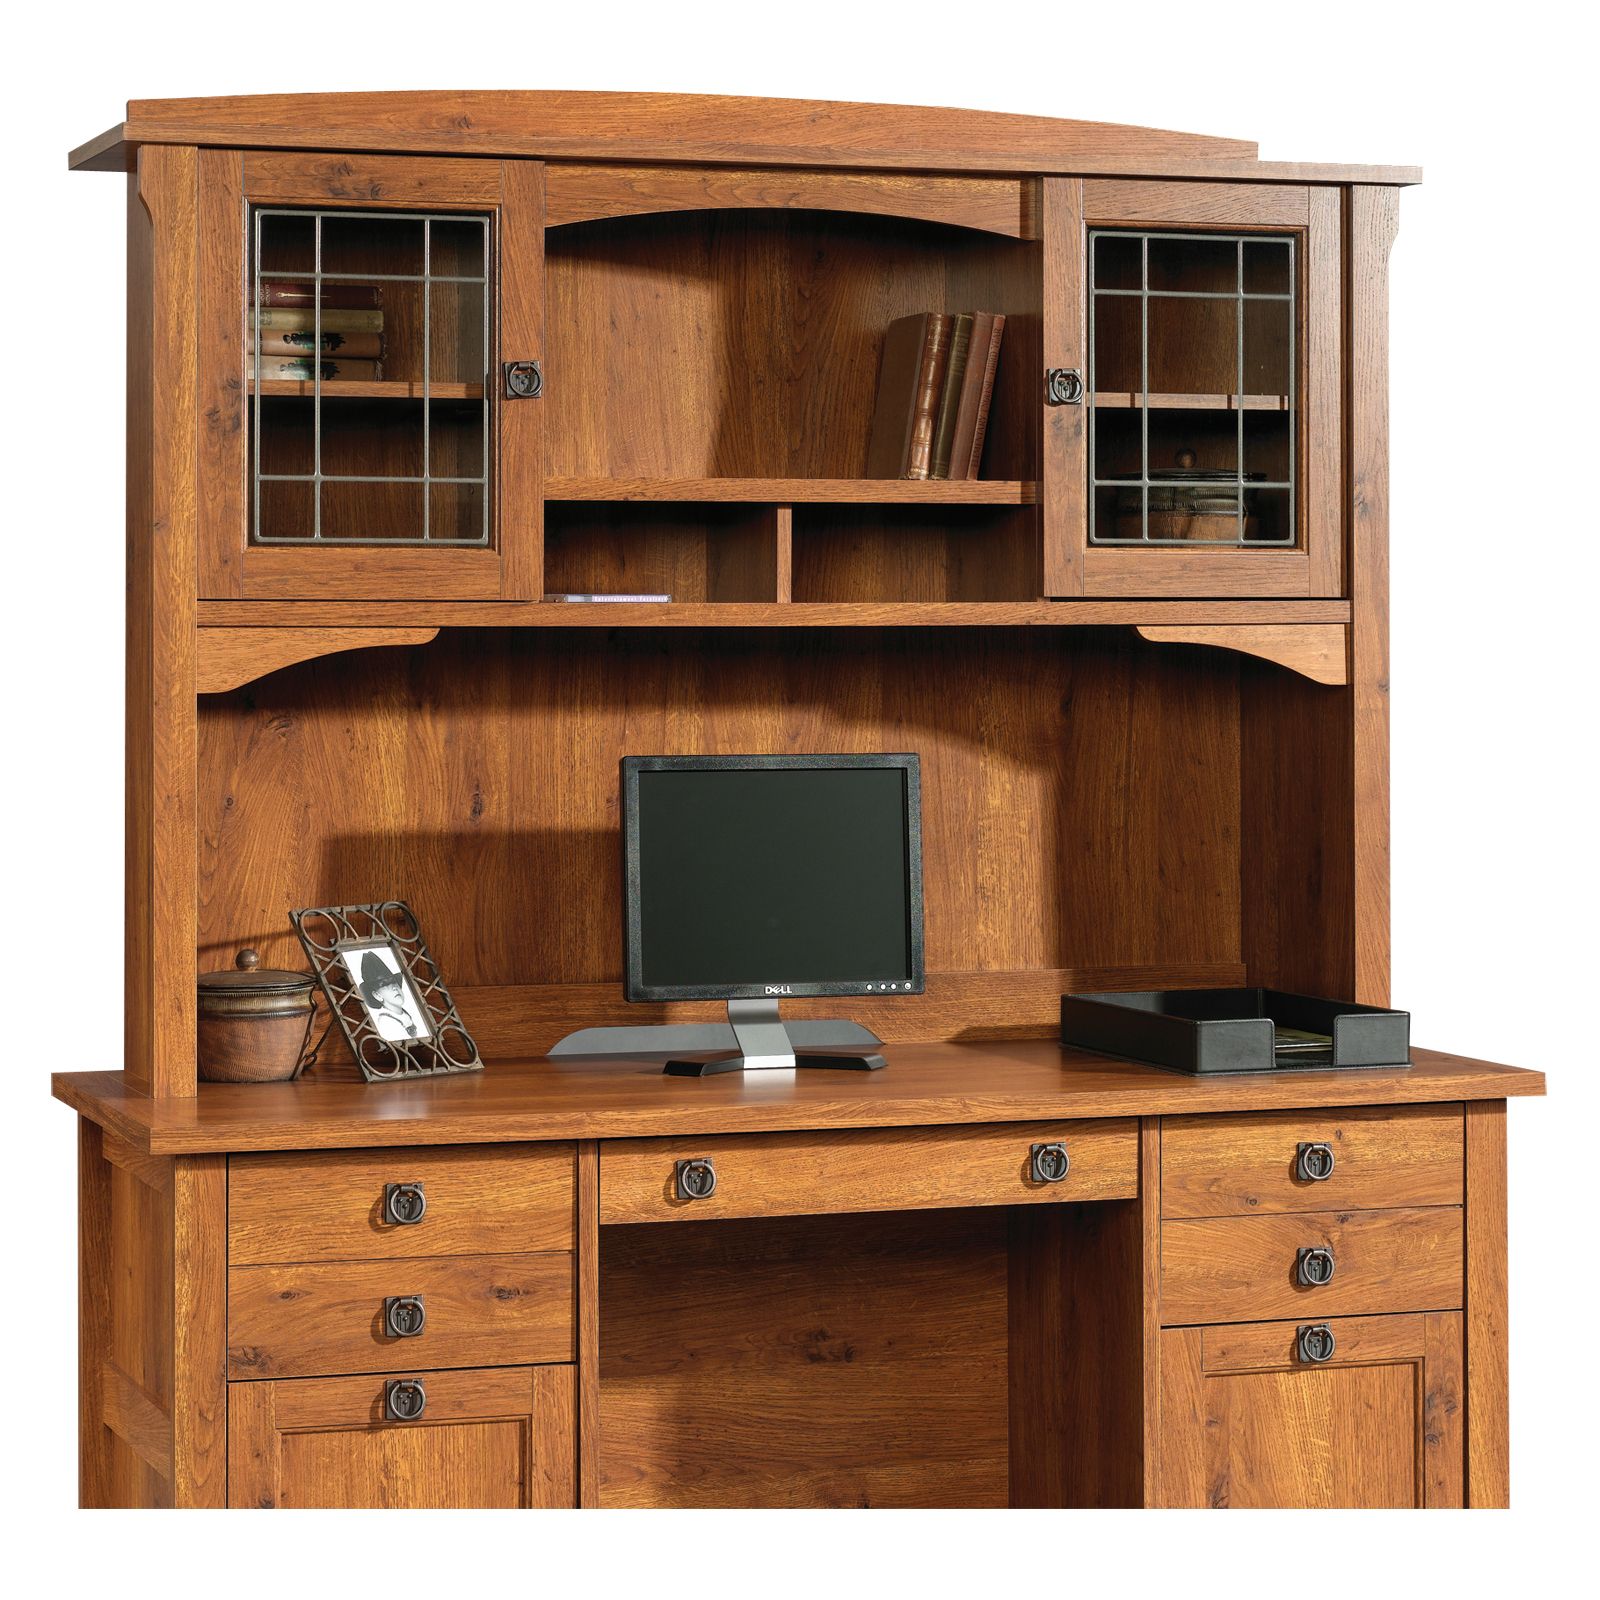 Desks | Buy A Home Office Desk At Hayneedle With White Traditional Desks Hutch With Light (View 15 of 15)